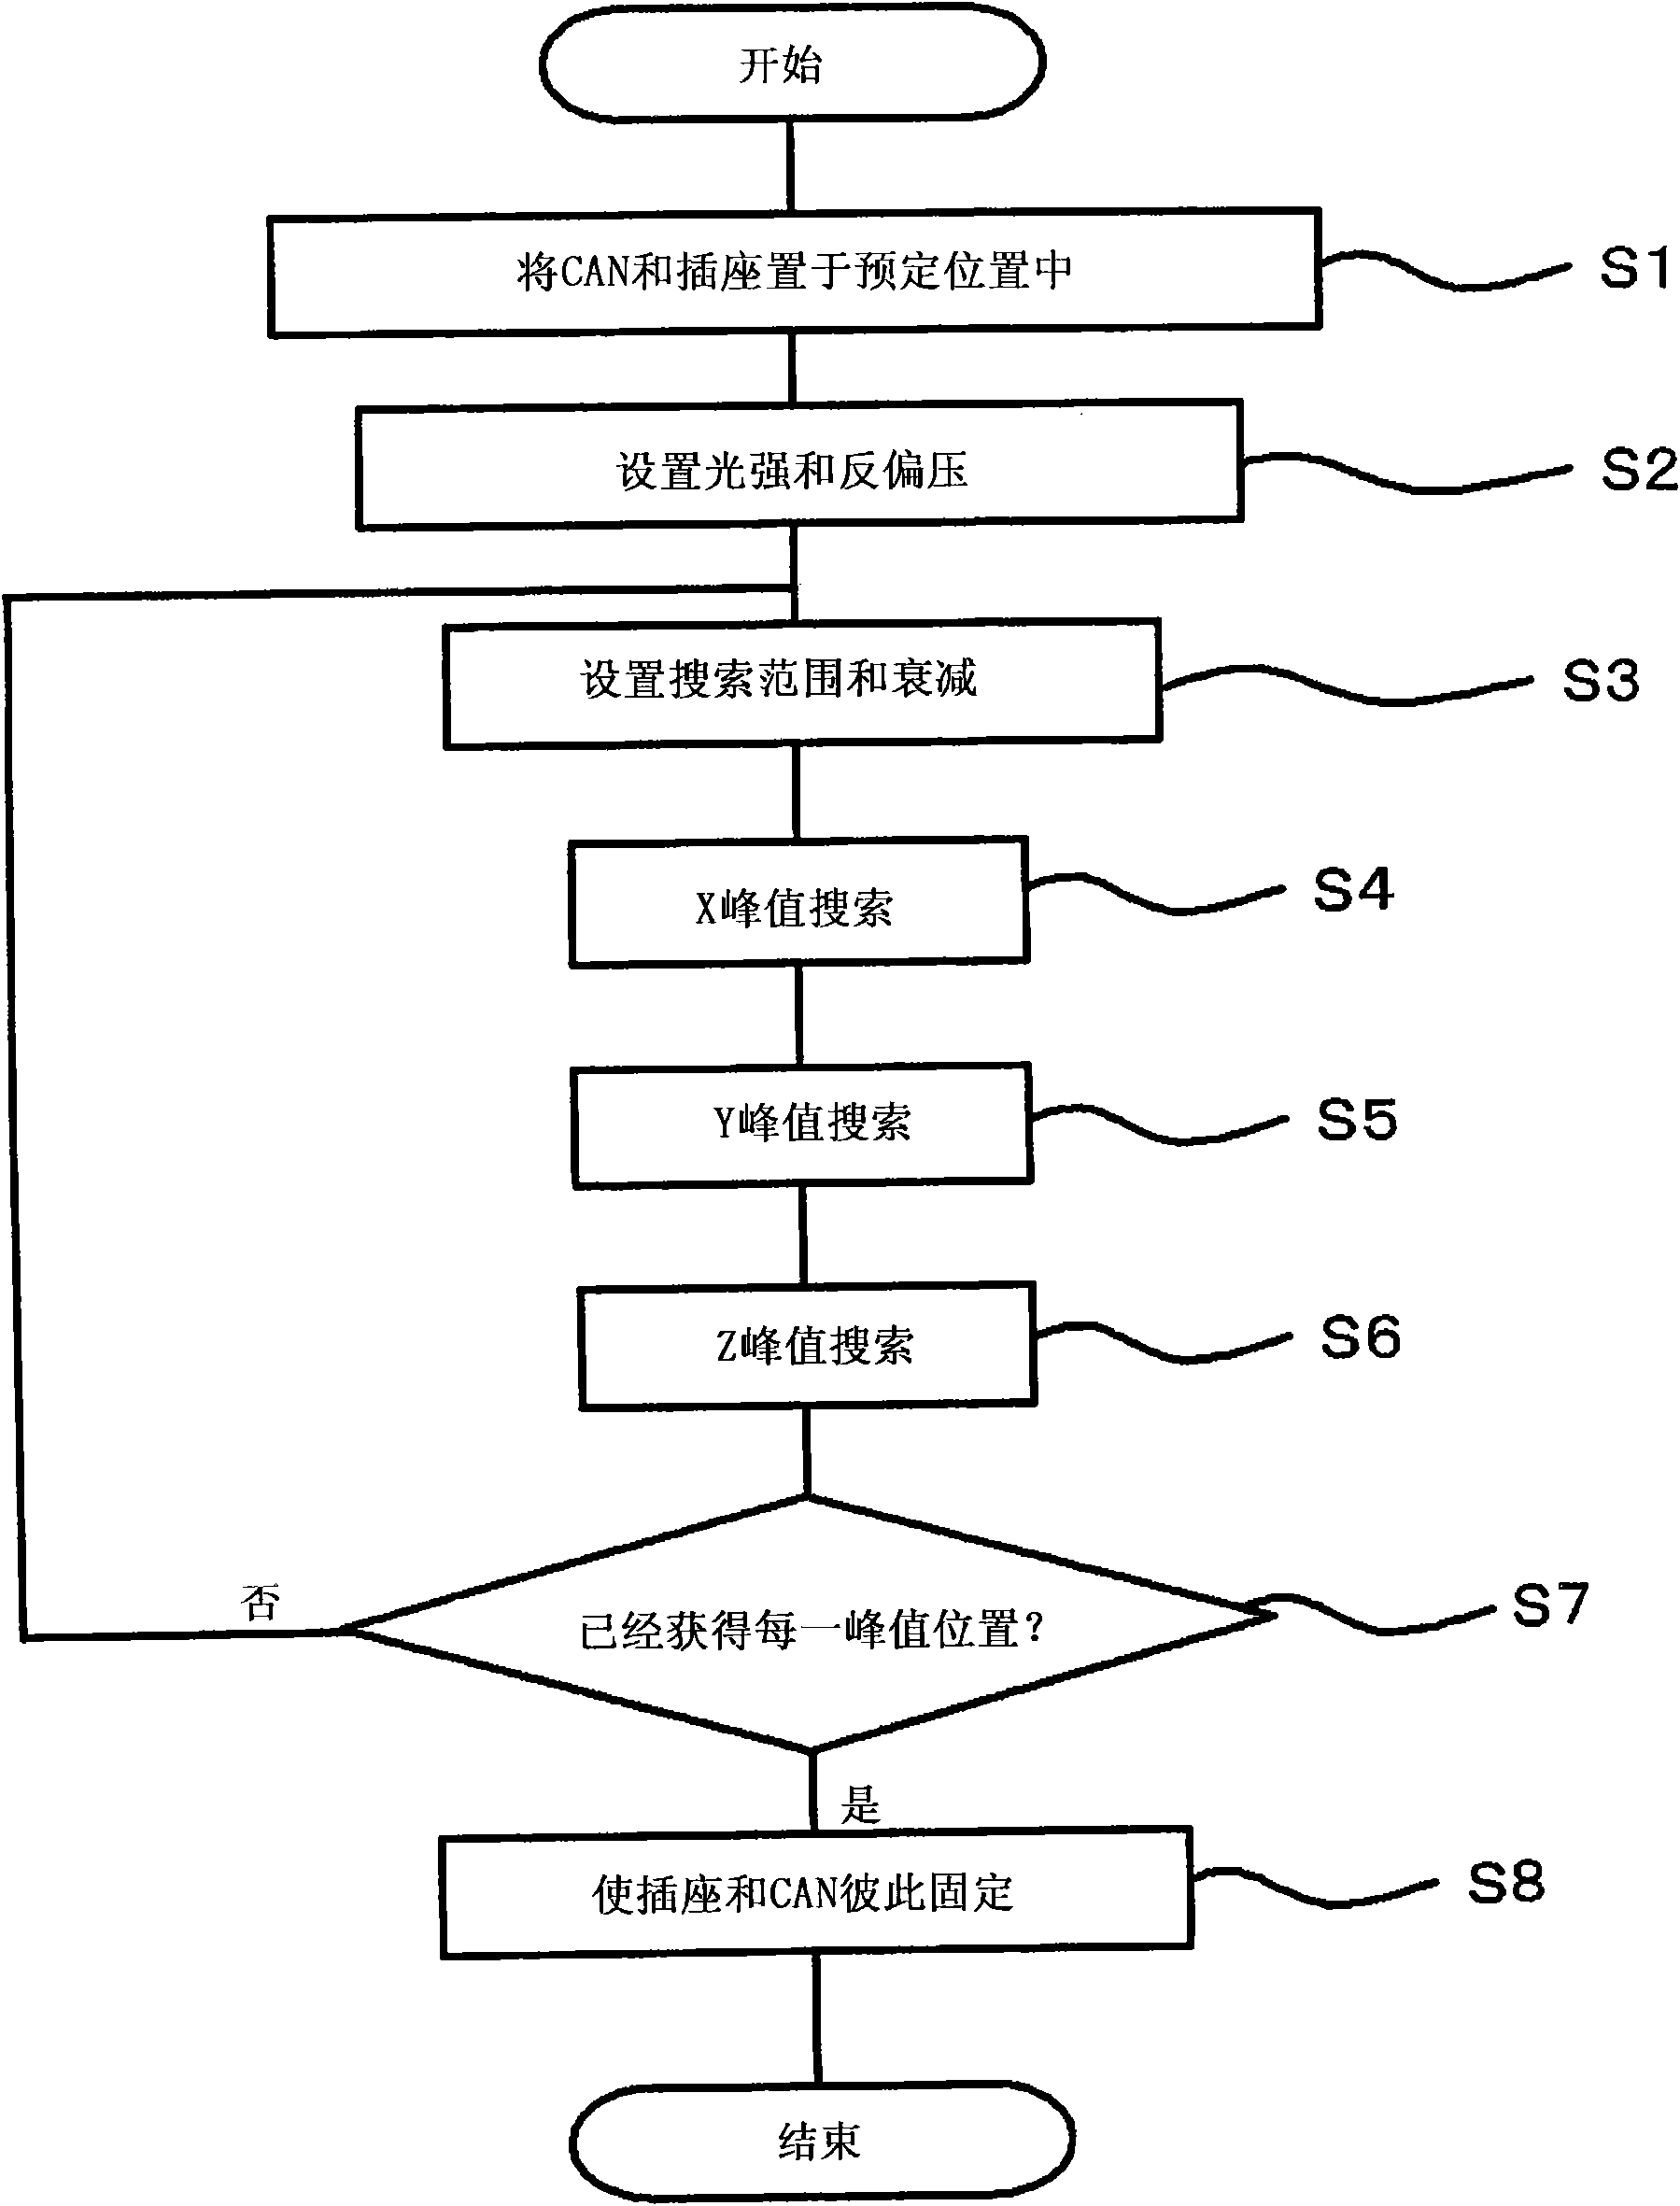 Method of manufacturing optical receiver module and apparatus for manufacturing the same